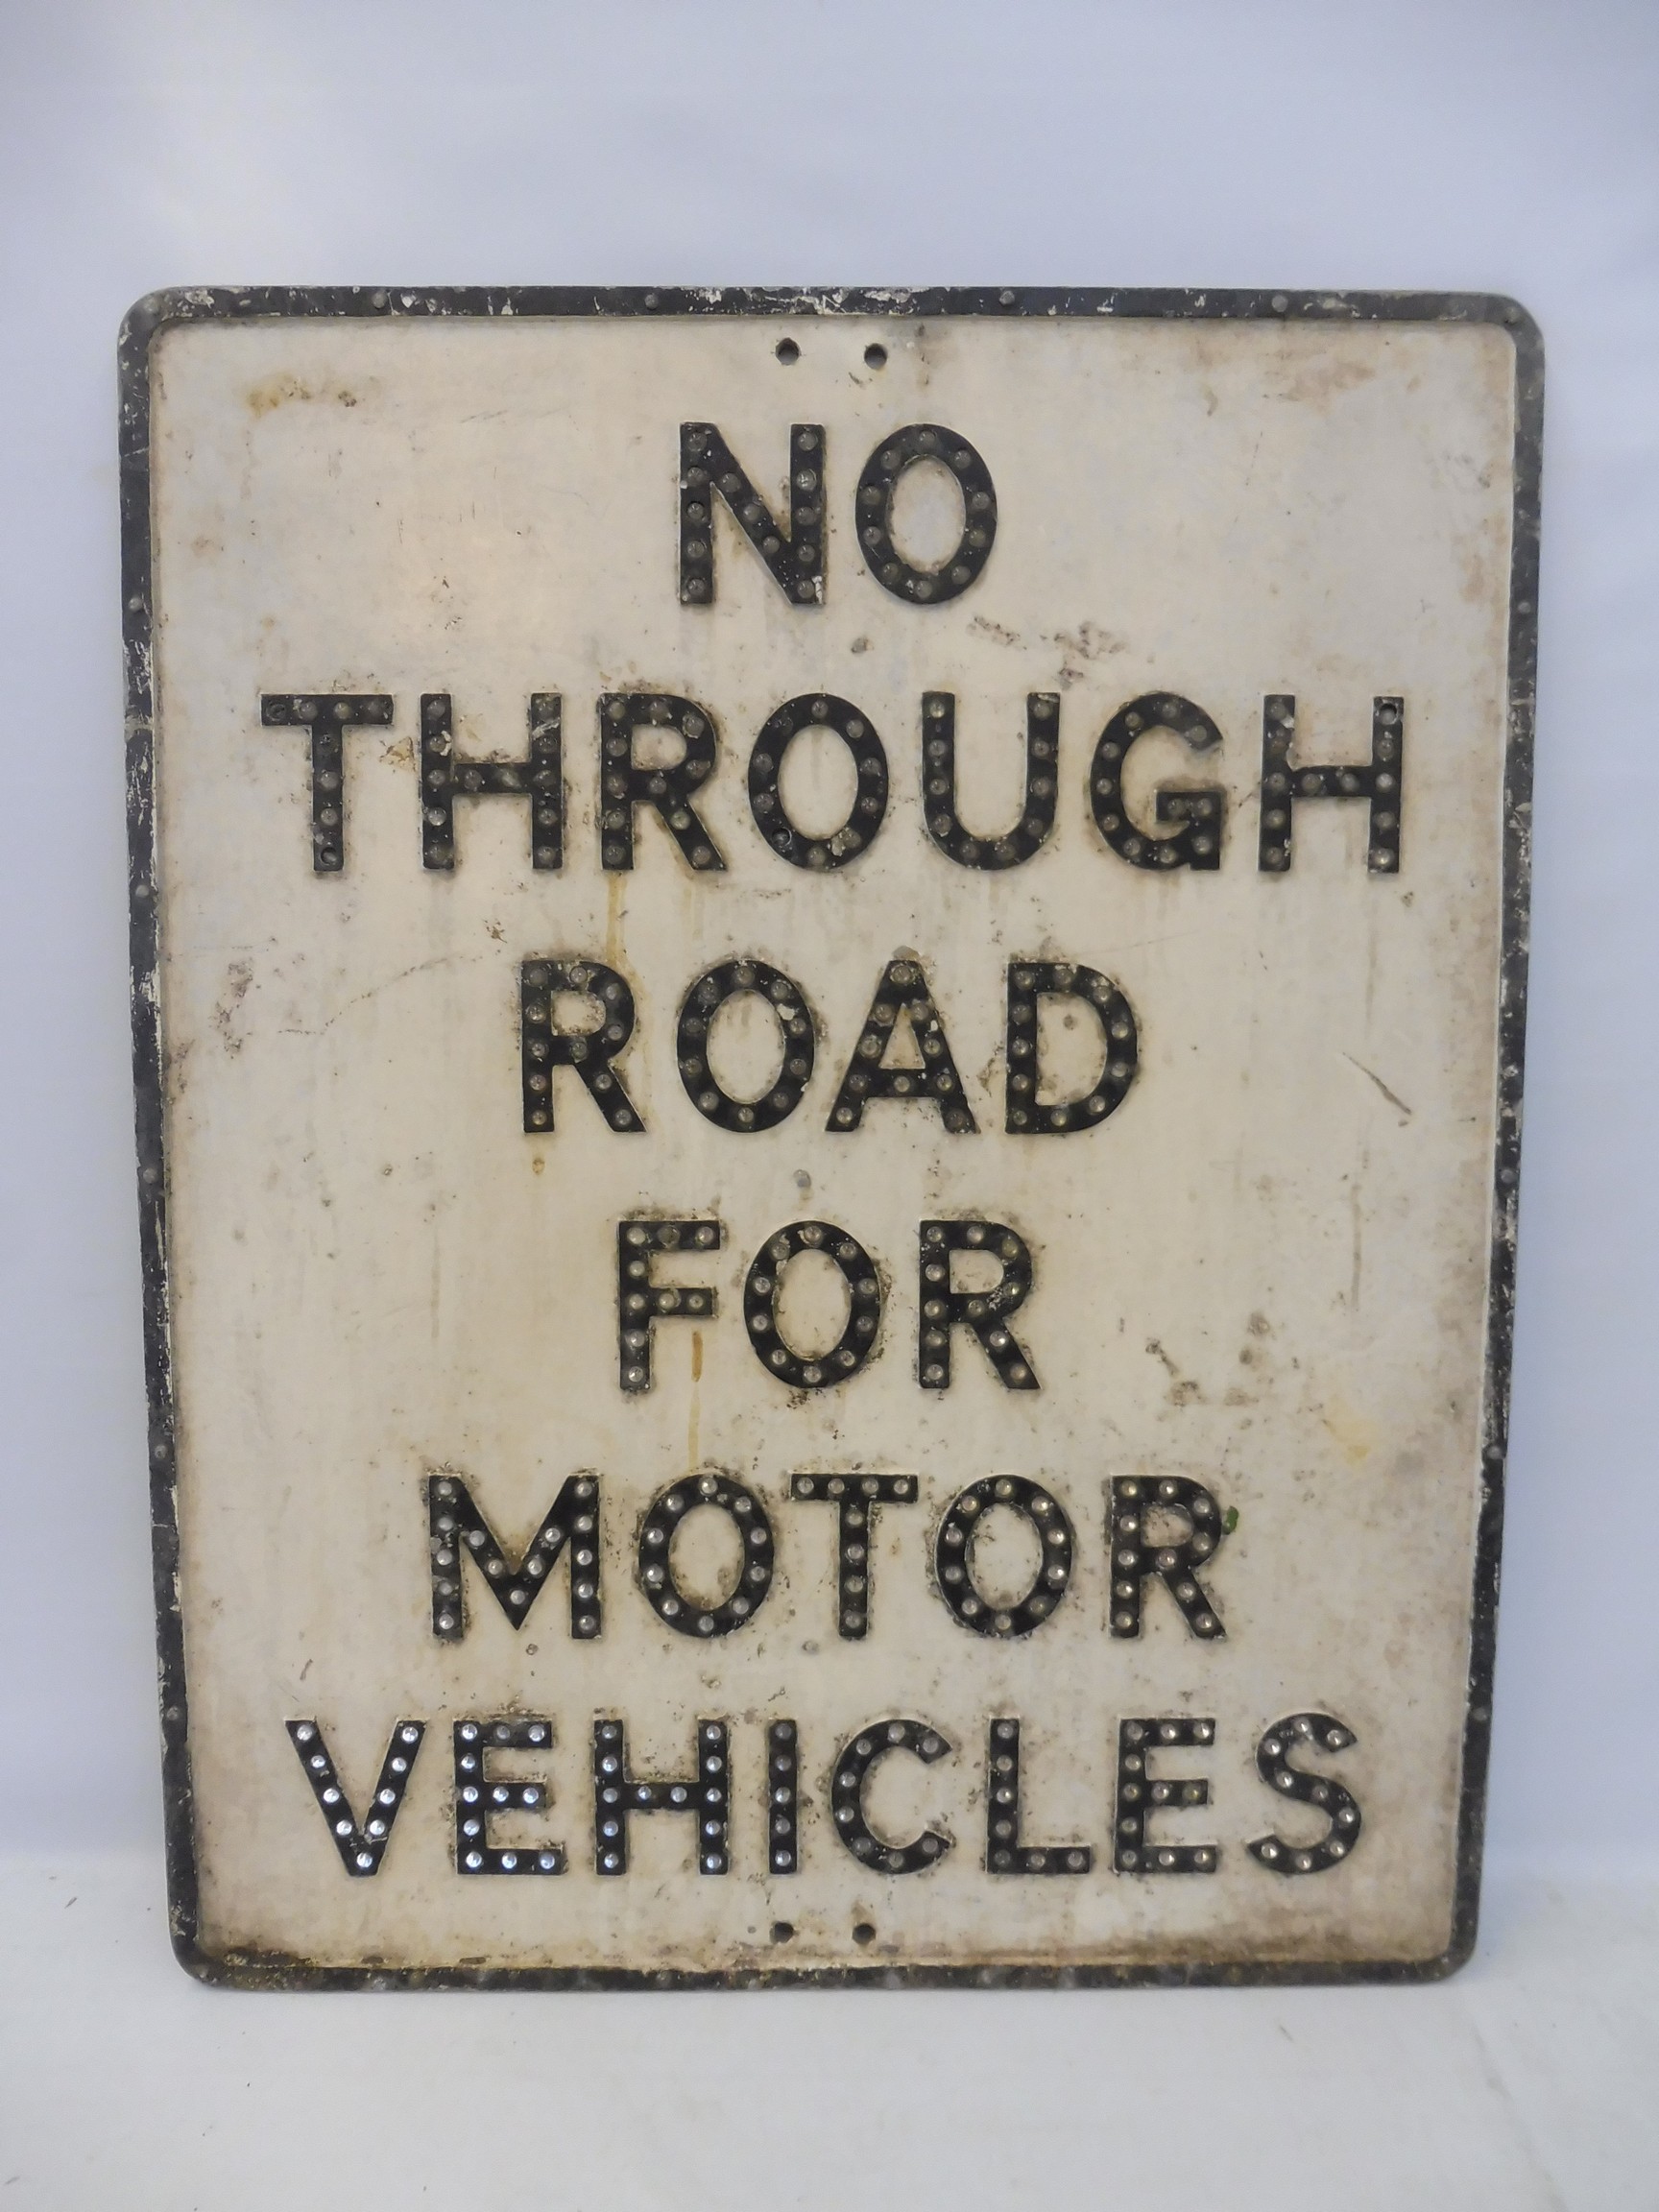 A 'No Through Road for Motor Vehicles' aluminium road sign with integral glass reflective beads,